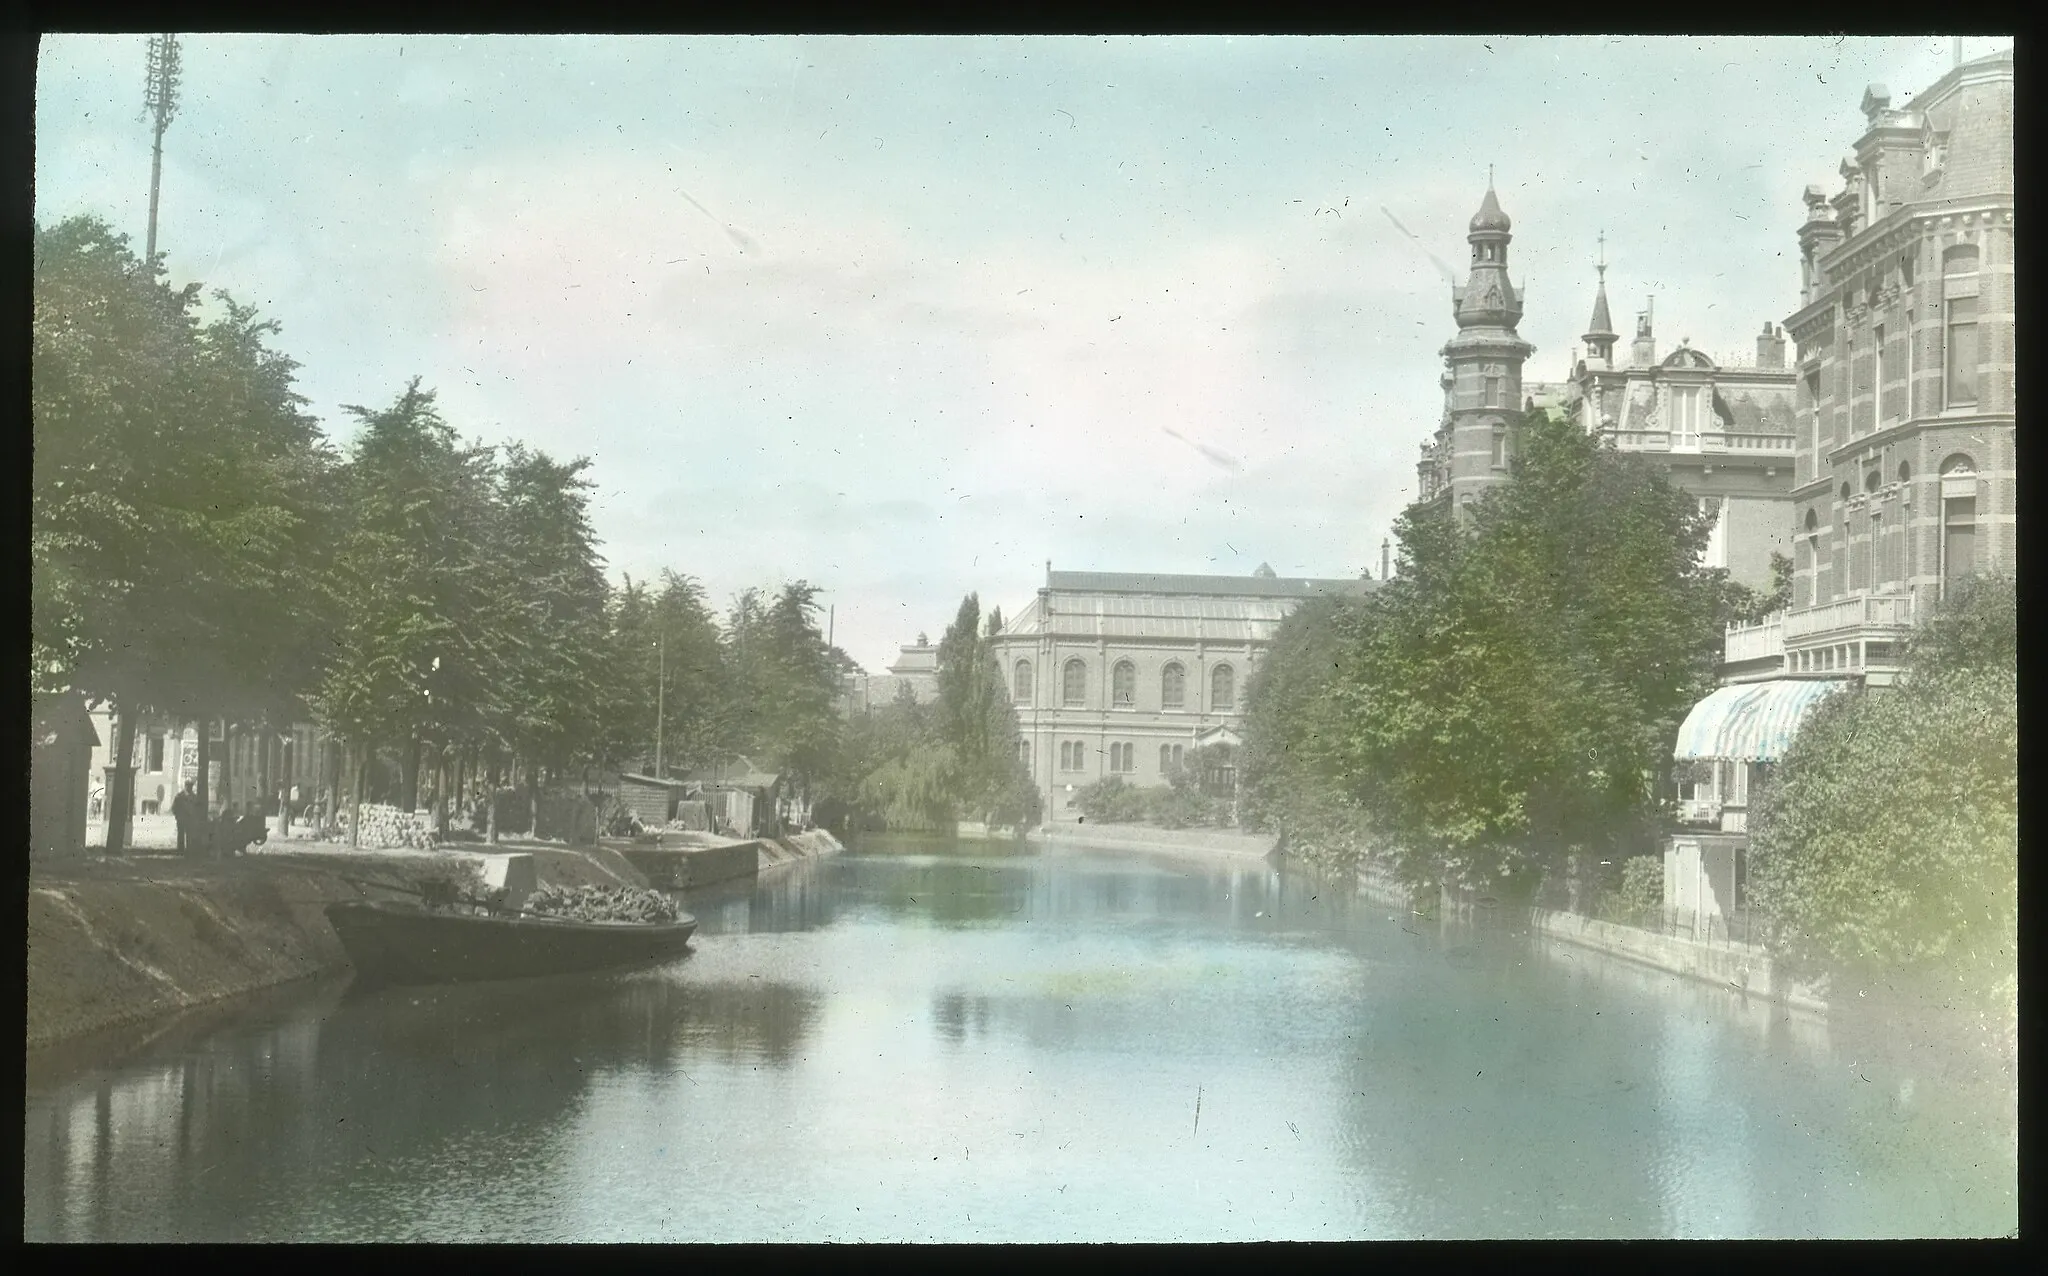 Photo showing: View looking down a canal in Amsterdam. Several boats sit moored at the side of the canal opposite a tall spire topped building. The Arrases visited Amsterdam during their 1913 tour of Europe. Note on slide reads "Amsterdam canal." Edmund F. Arras (7/7/1875-10/19/1951), a prominent Columbus businessman and entrepreneur, founded one of Columbus, Ohio’s first property rental agencies in 1892. Trained as a lawyer, he graduated from OSU law school in 1896 and went on to hold positions in numerous civic groups around the city. He was particularly active within Kiwanis International and was involved with several local religious organizations. In 1913, he and his wife Elizabeth traveled to the World Sunday School Association Convention in Zurich, Switzerland. They continued on to travel extensively throughout Europe documenting their journey through photographs. Due to the timing of their trip, these photos comprise a valuable collection of images of European cities later devastated by war. The Arras family’s lantern slides and negatives include images from their 1913 travels through US east coast cities, Atlantic islands of the Azores, Madeira, Gibraltar and the countries of Algeria, Italy, Switzerland, Germany, the Netherlands, Belgium, France, England, and Ireland. Also included are images from their 1920 train journey from Chicago to the western US for the Kiwanis Convention in Portland. These photographs include images of Chicago, Denver and western National Parks. Negative image also in collection HA3_B10_0545.